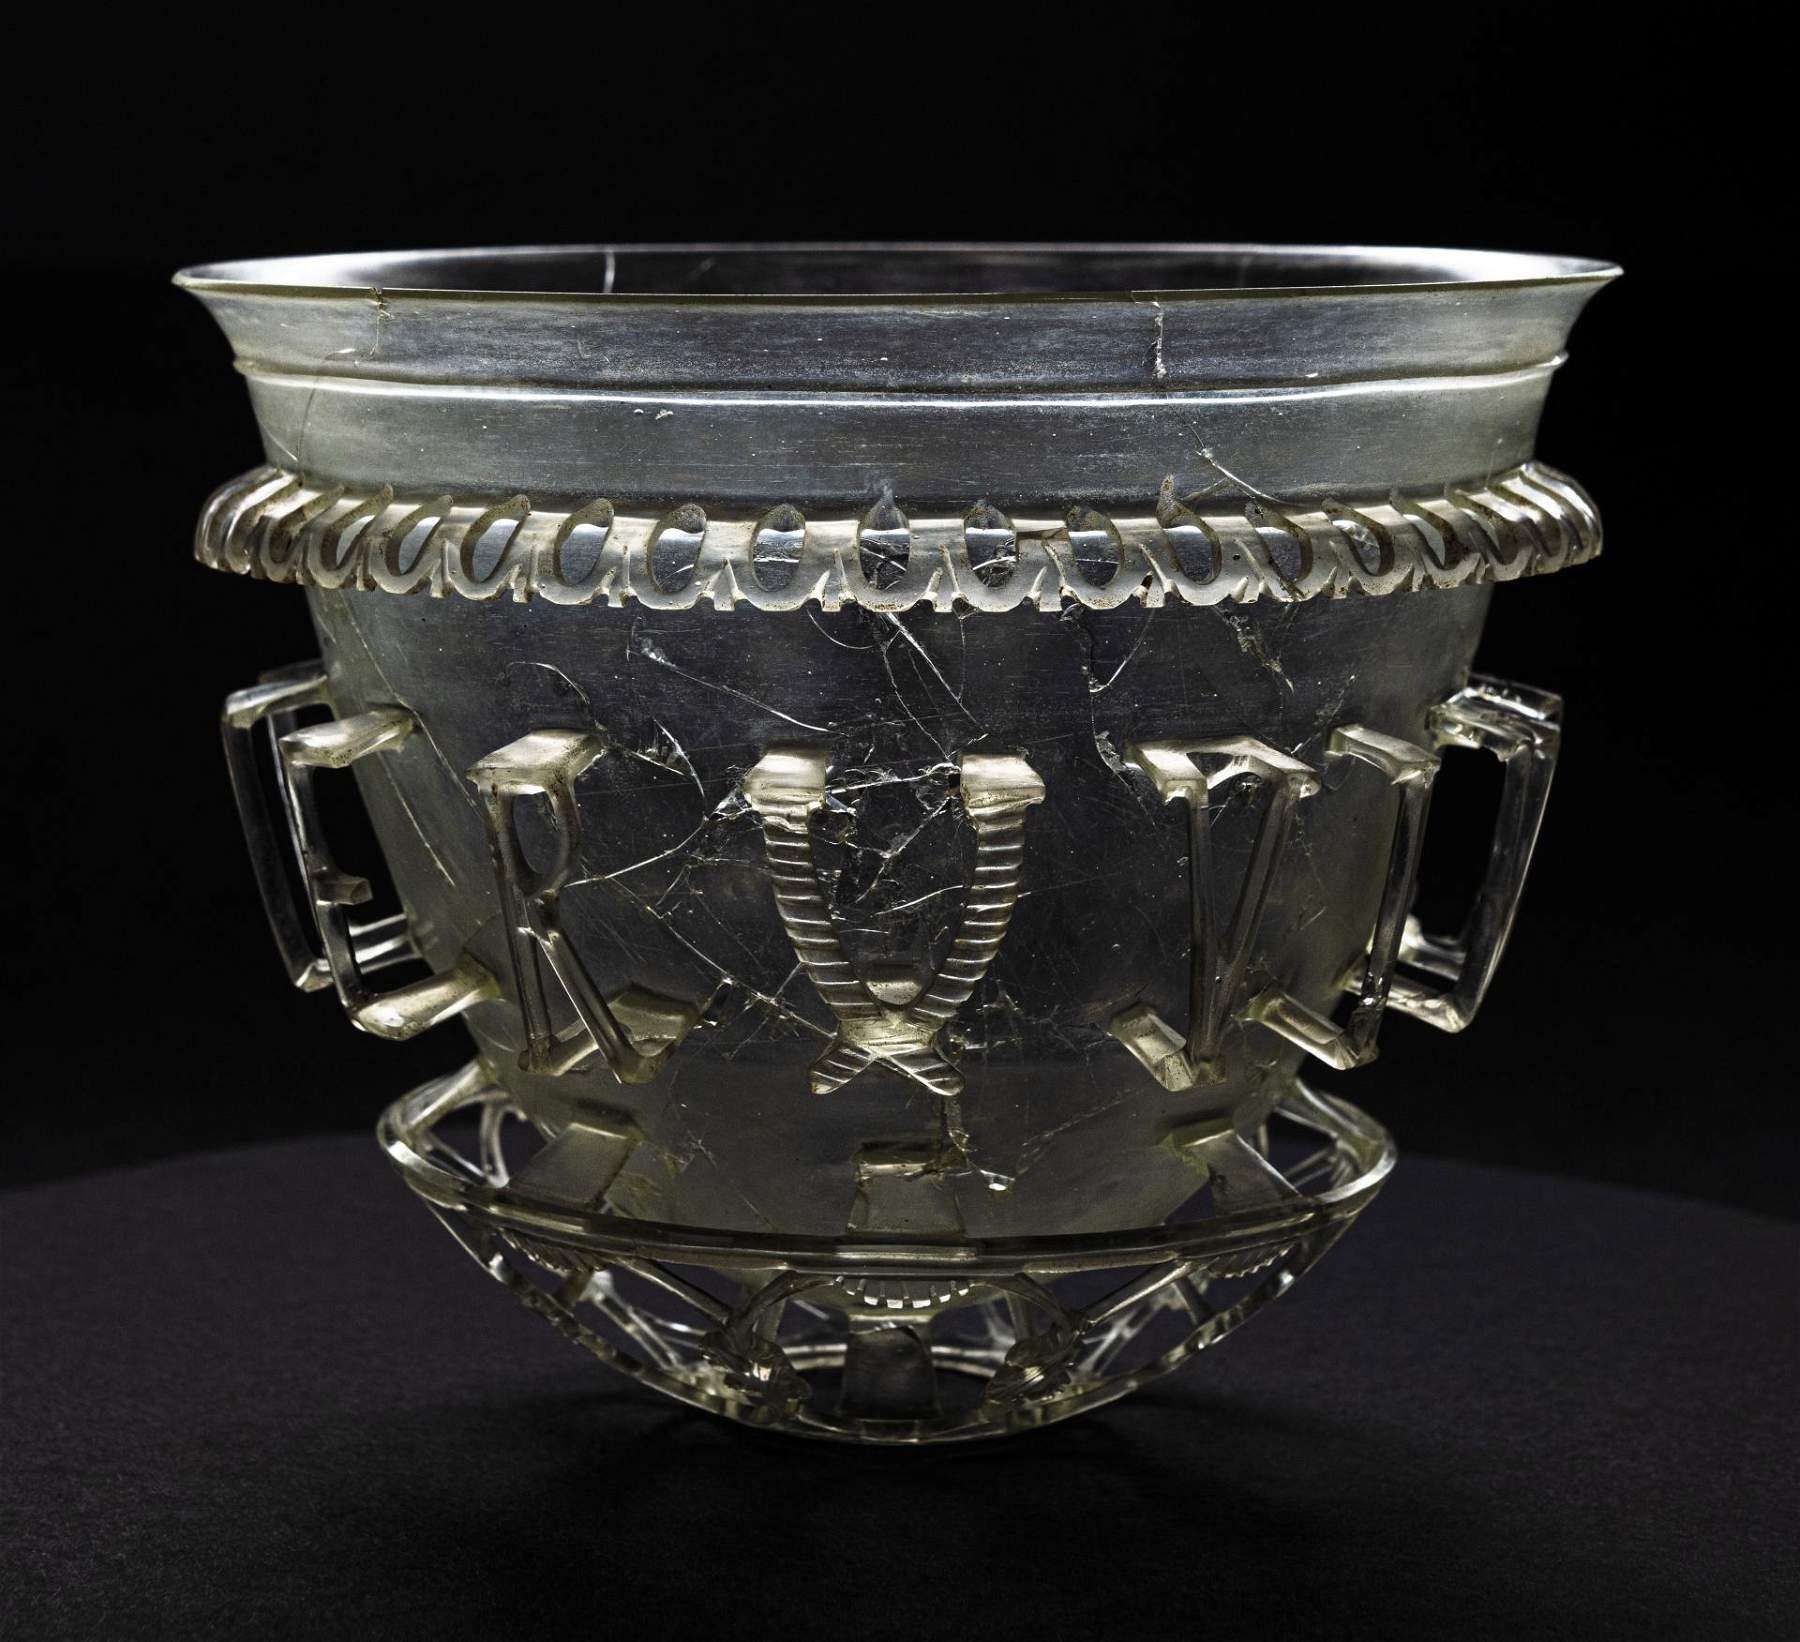 France, extremely rare diatreta cup discovered in 2020 reveals its secrets